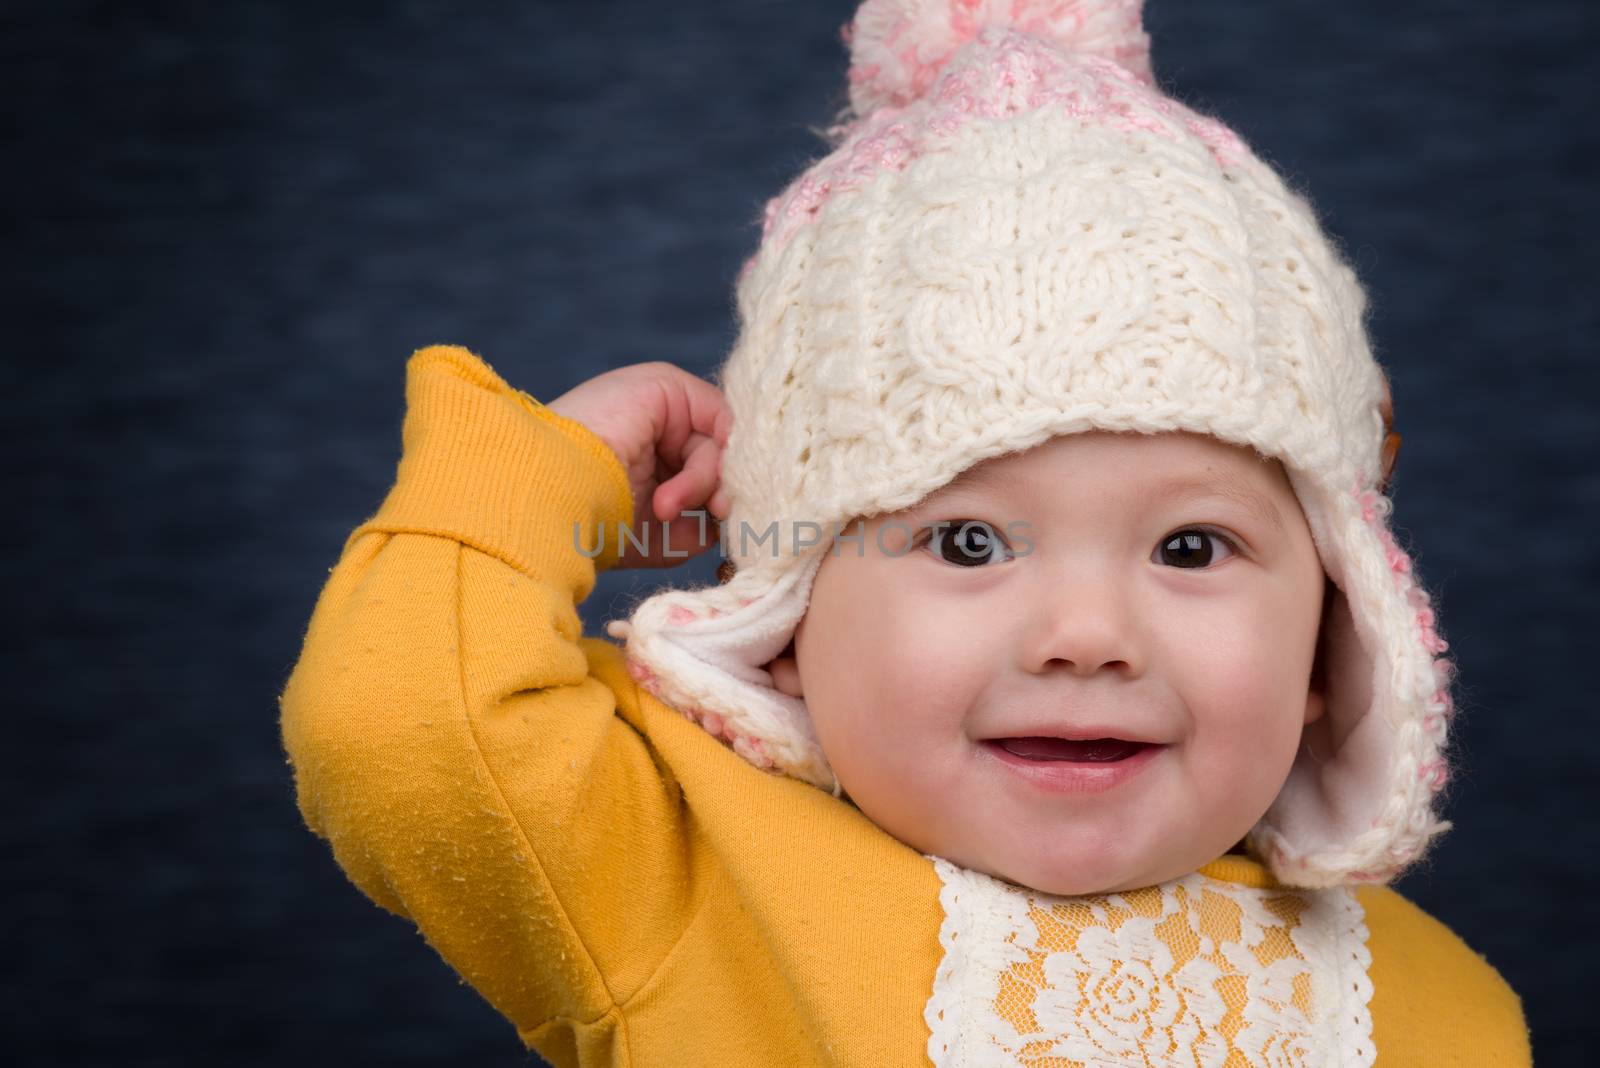 A smiling baby girl wearing a knit winter hat.